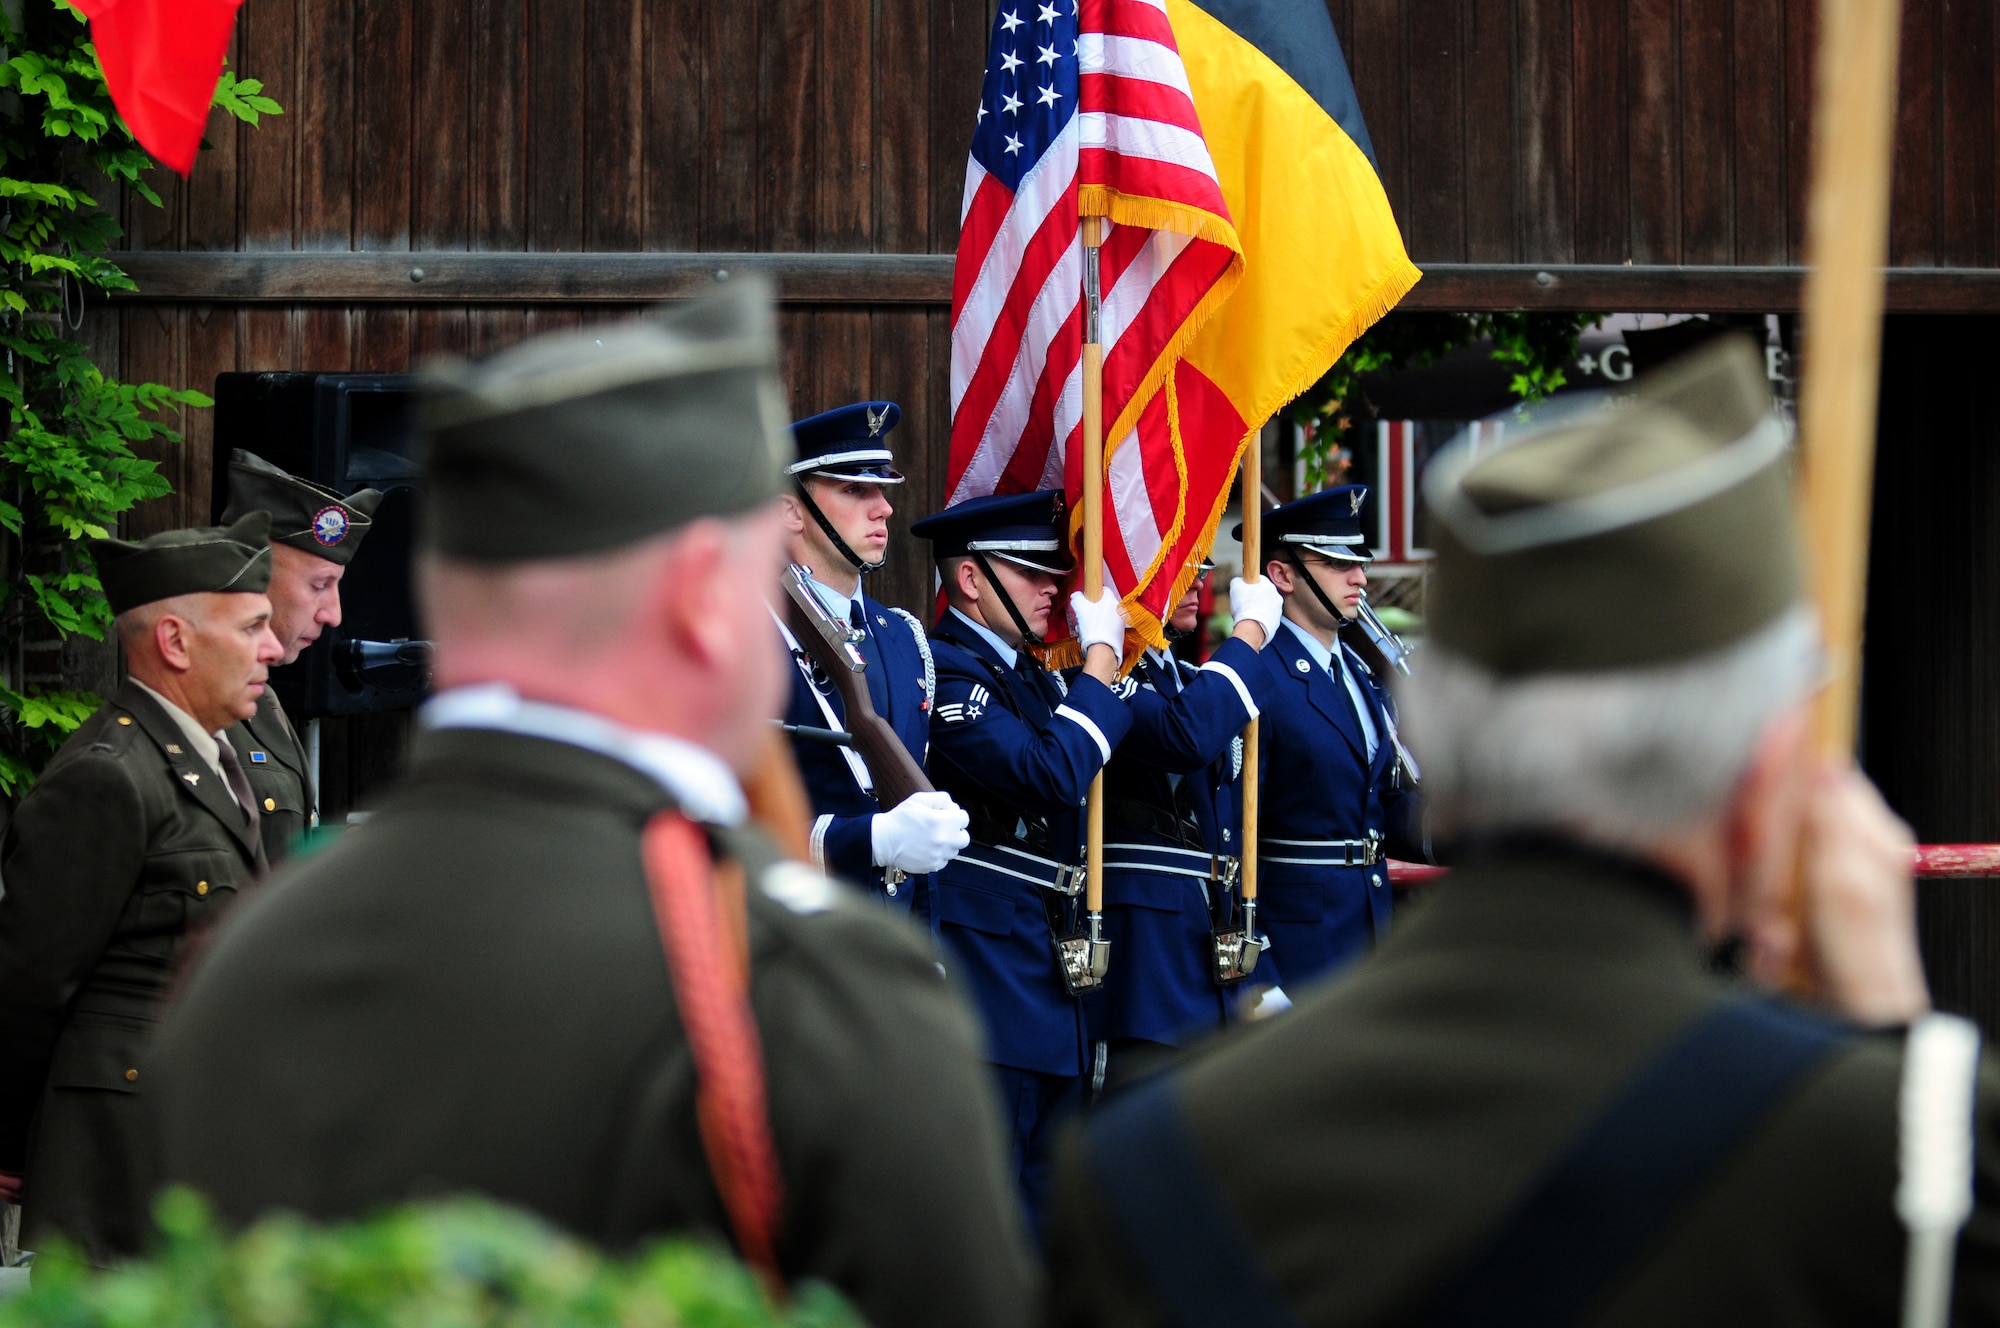 BORLO, Belgium – 52nd Fighter Wing Honor Guard members stand at attention before posting the colors during a 9-11 memorial ceremony here Sept. 11. U.S. service members and Belgian World War II Honor Guard Team members, along with the local community, participated in this ceremony as part of the Belgian Open Monument Day in remembrance of the victims of the Sept. 11, 2001 terrorist attacks on the United States. (U.S. Air Force photo/Airman 1st Class Matthew B. Fredericks)